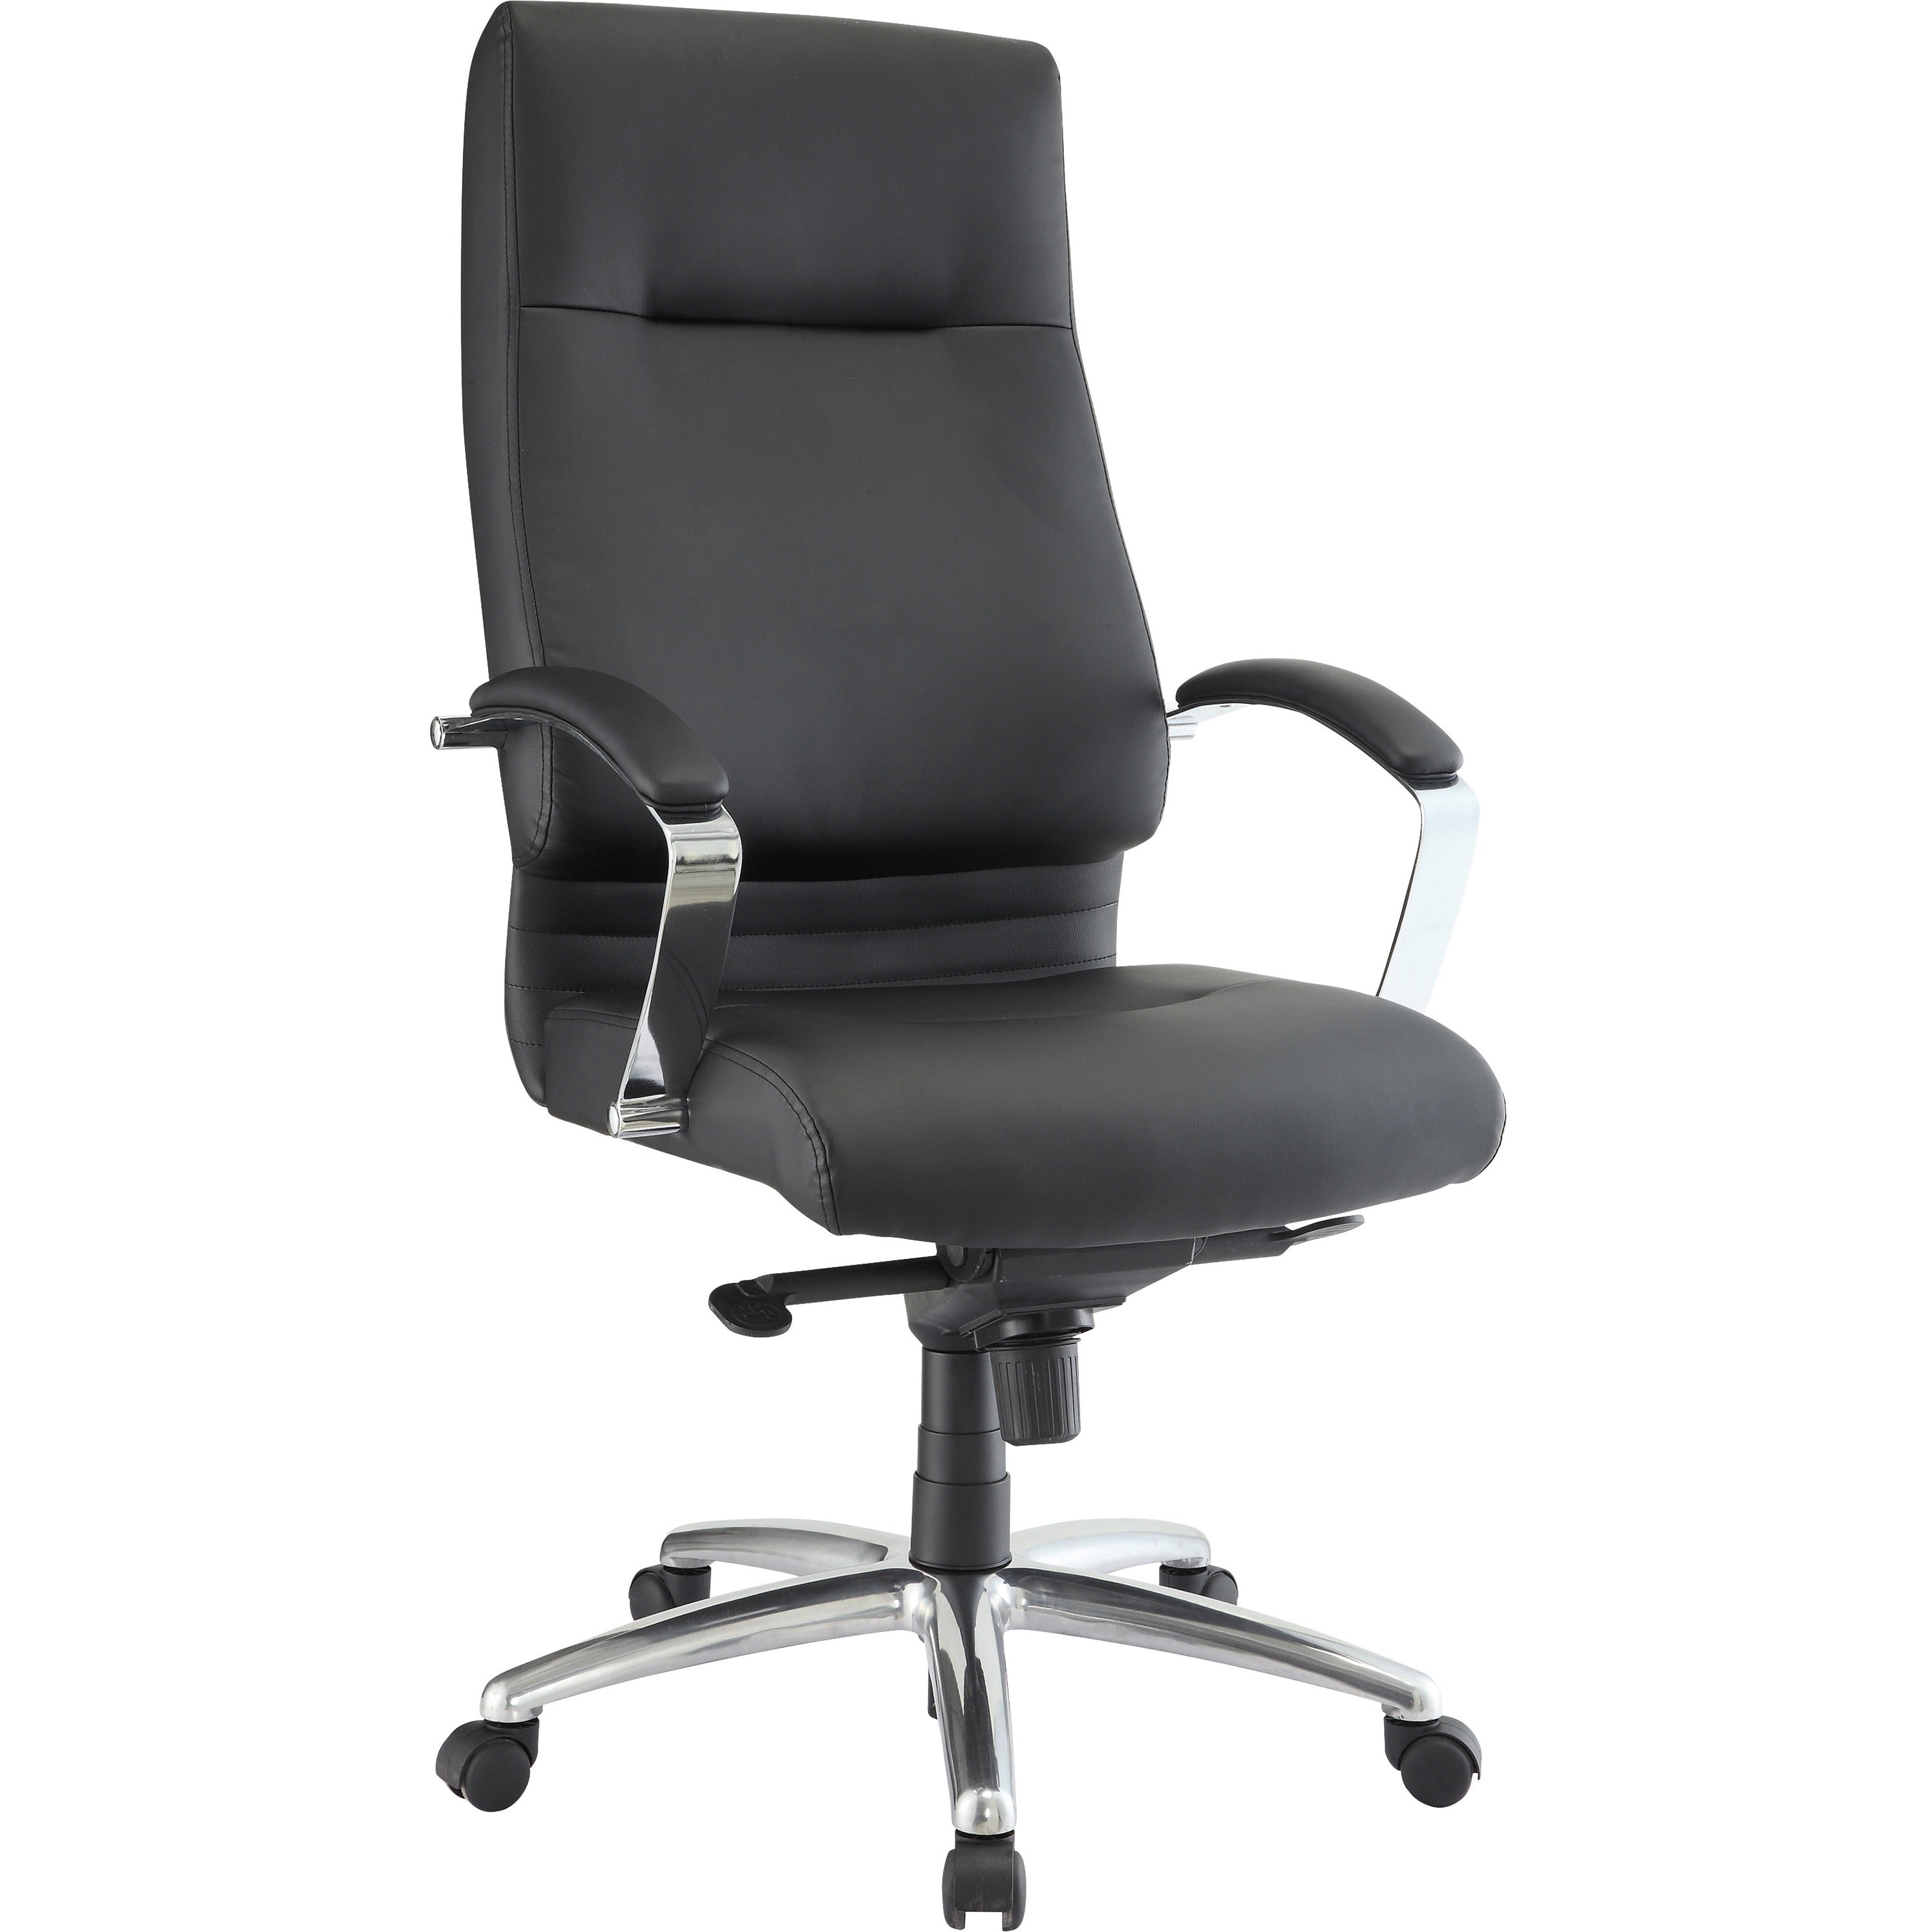 Lorell Executive High-back Chair with Fixed Arms - Leather Seat - Black Leather Back - 5-star Base - 1 Each - 